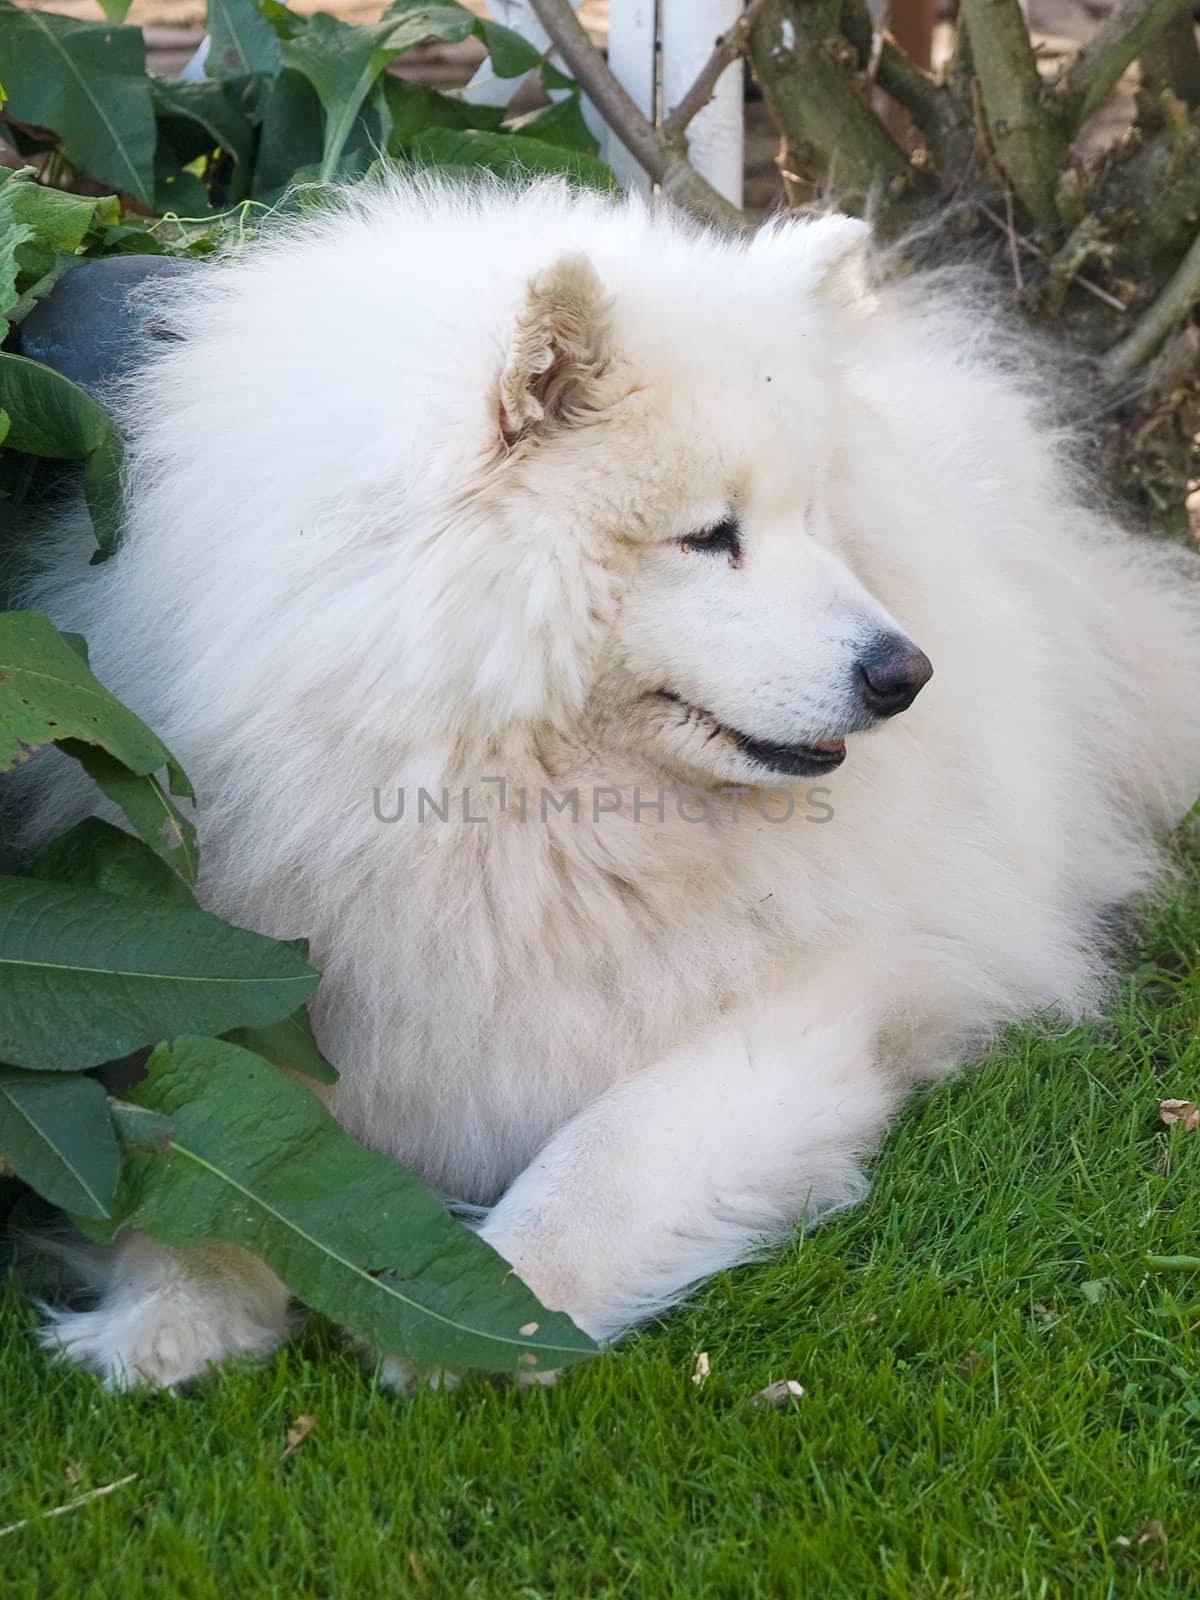 Beautiful Samoyed dog resting on the grass in a garden